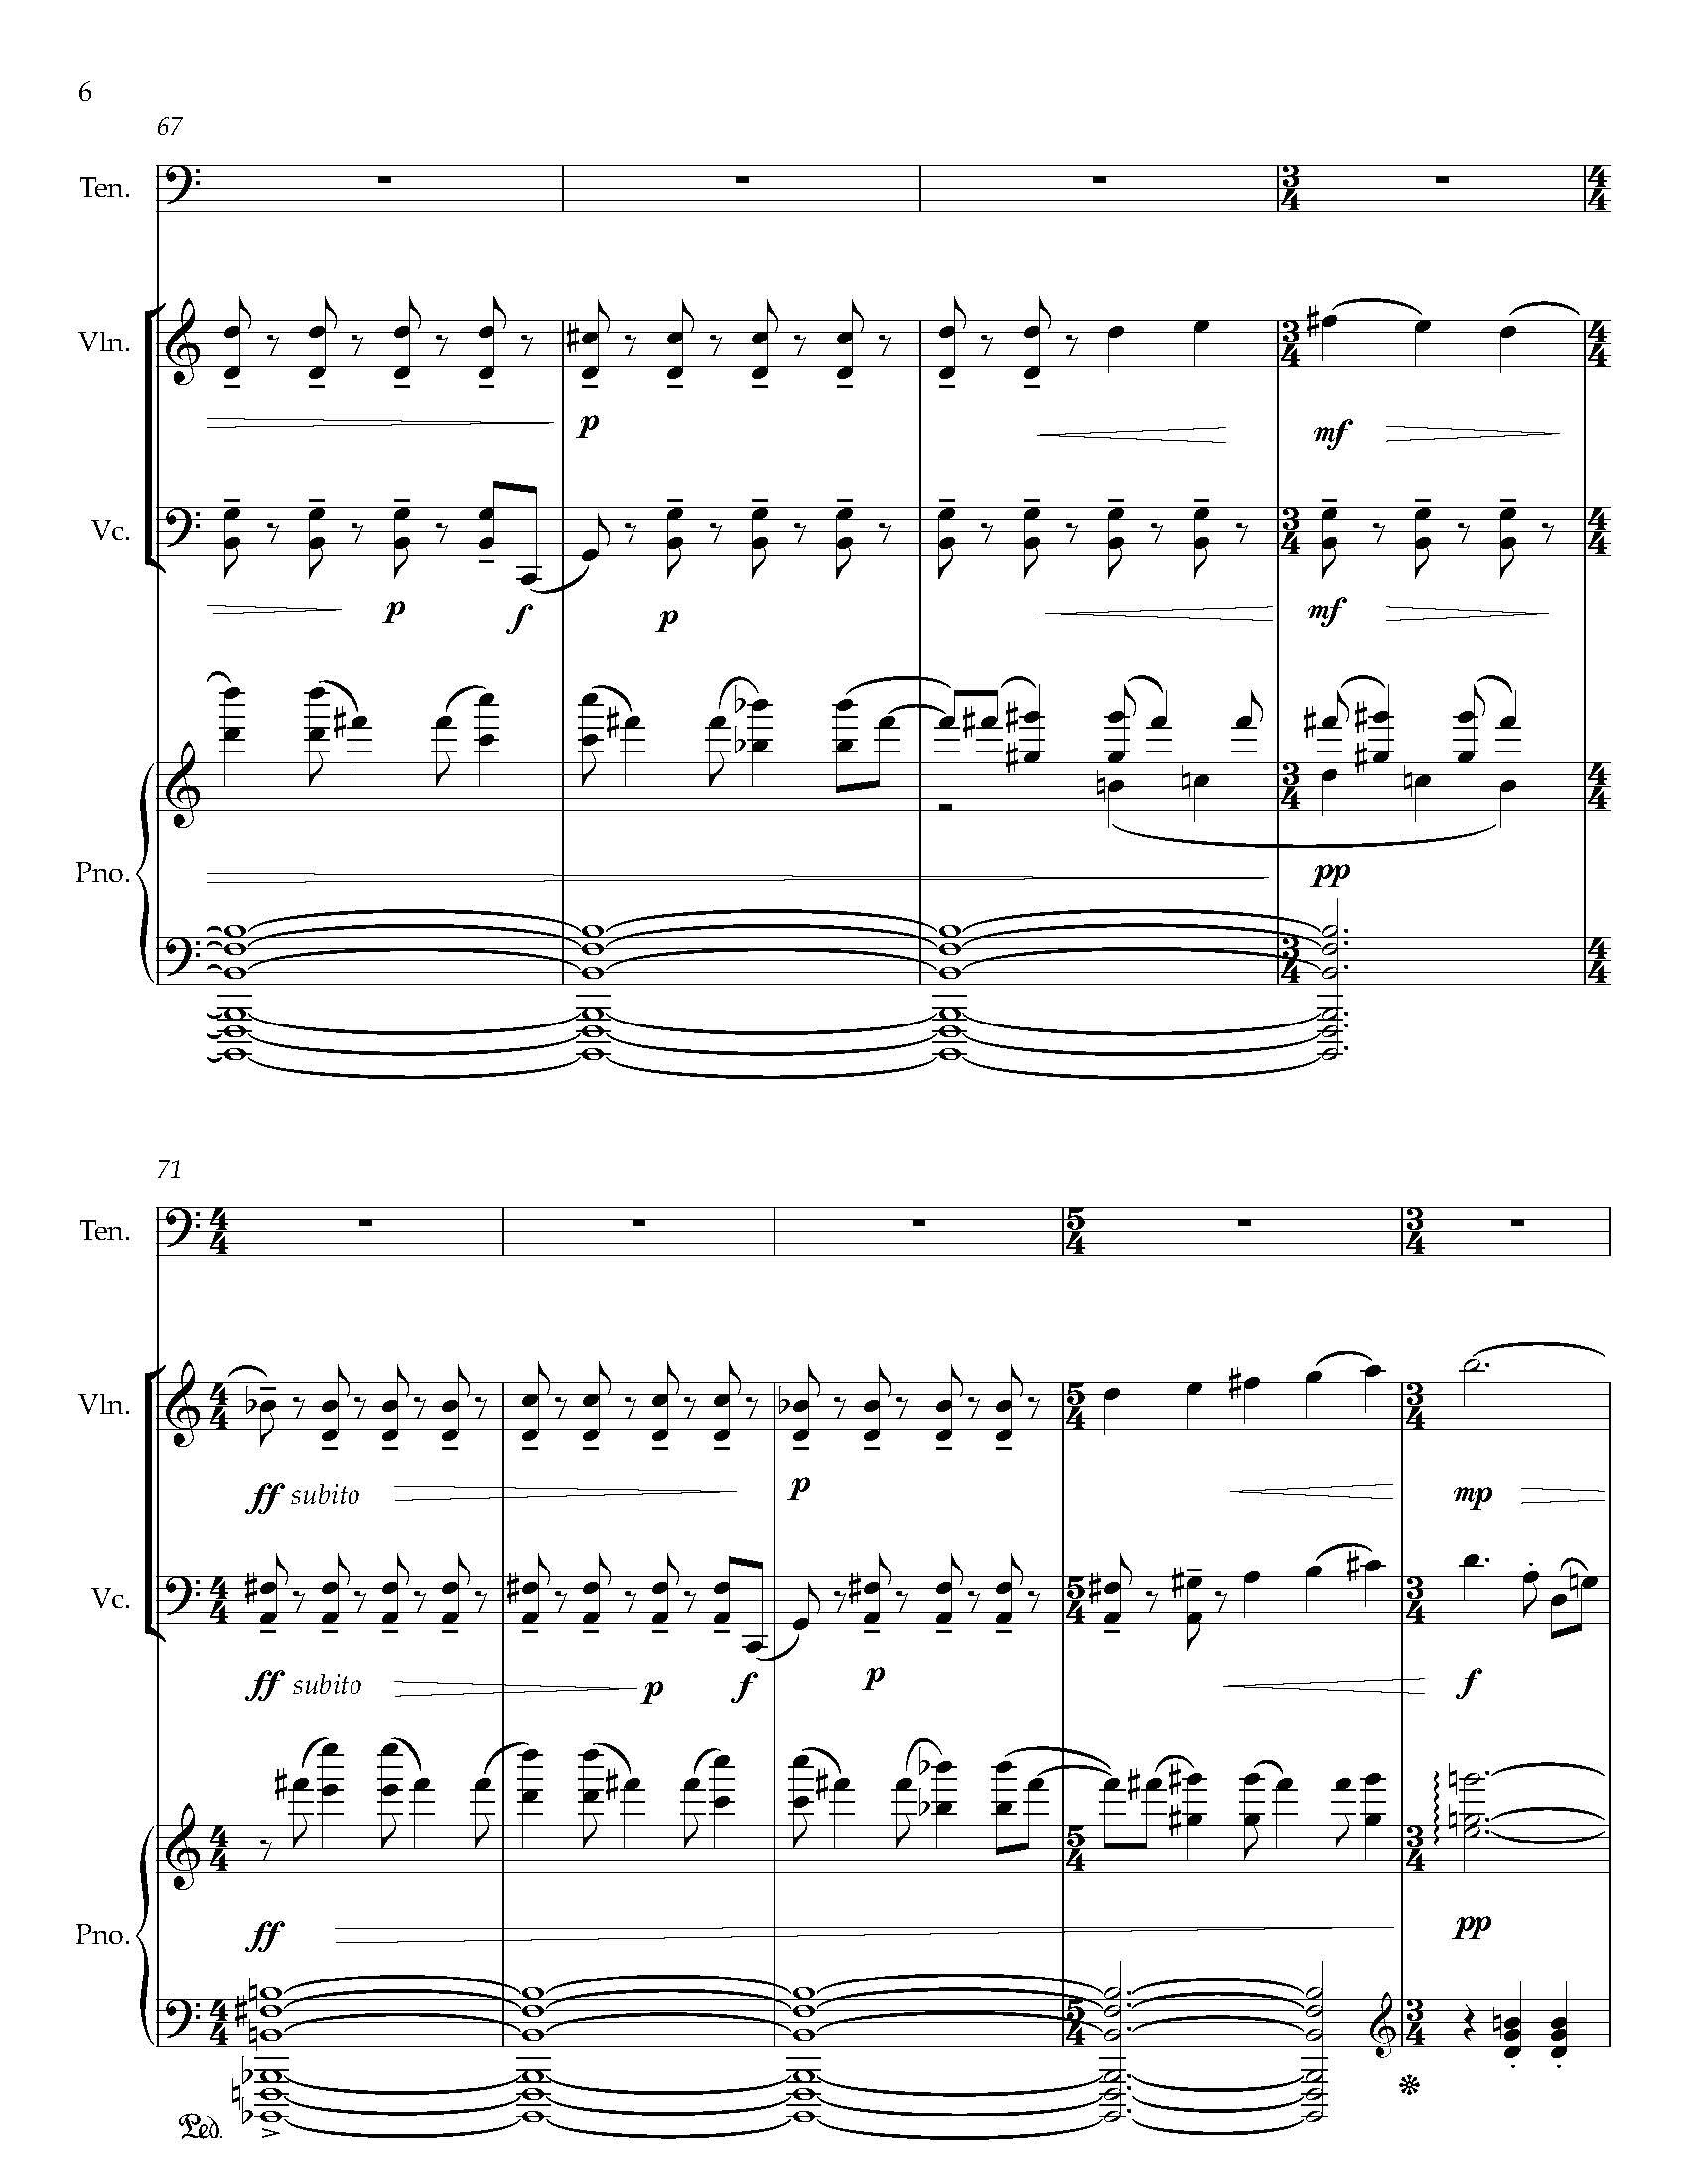 Gursky Songs - Complete Score_Page_14.jpg